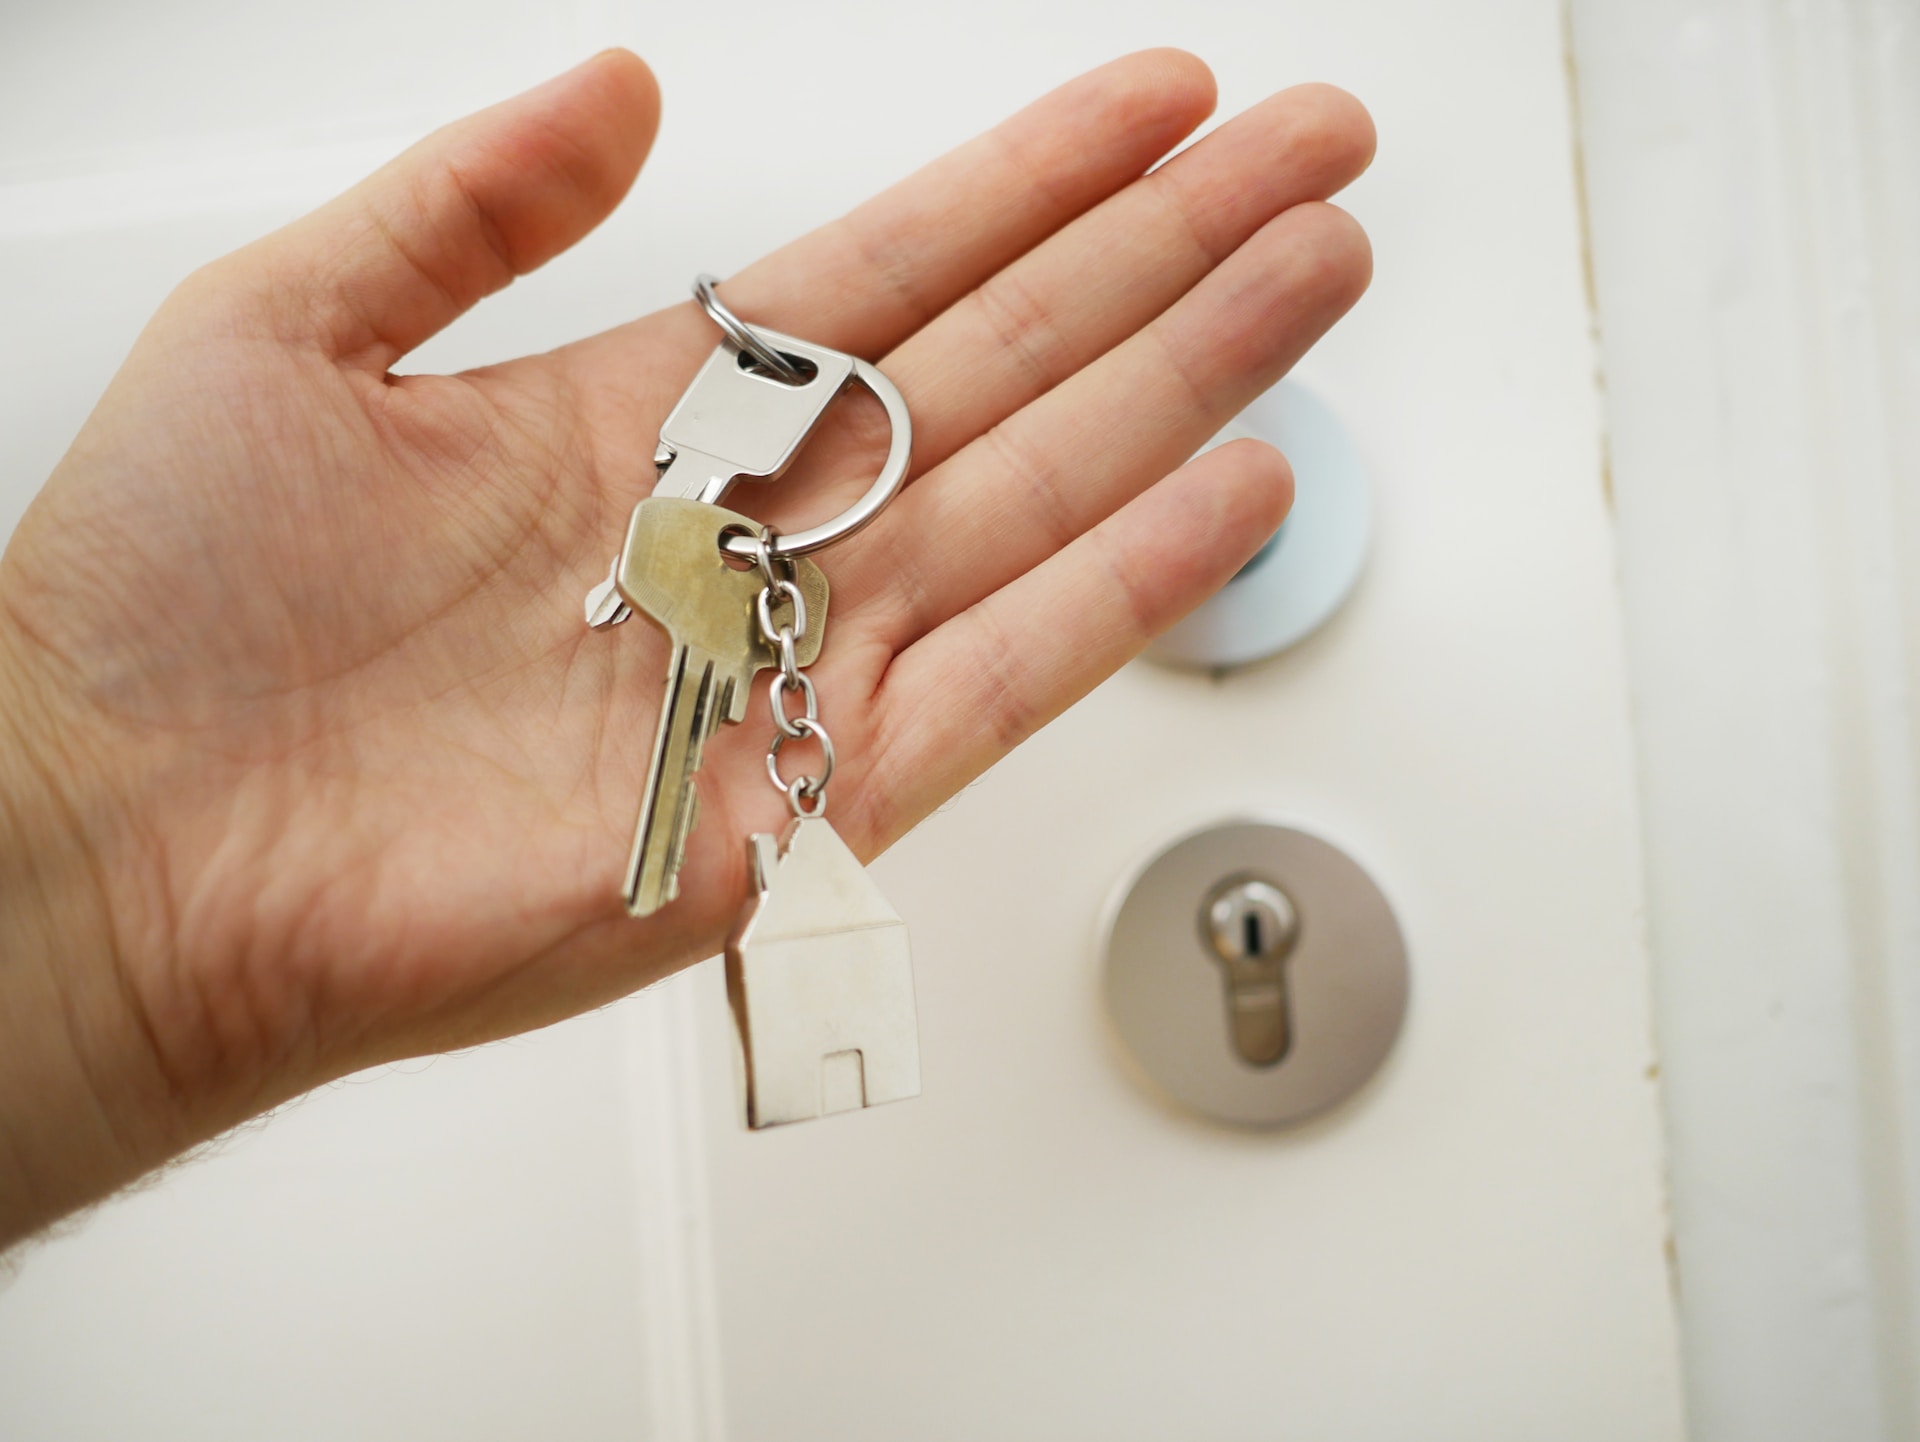 Photograph of a hand holding a set of keys outside a door